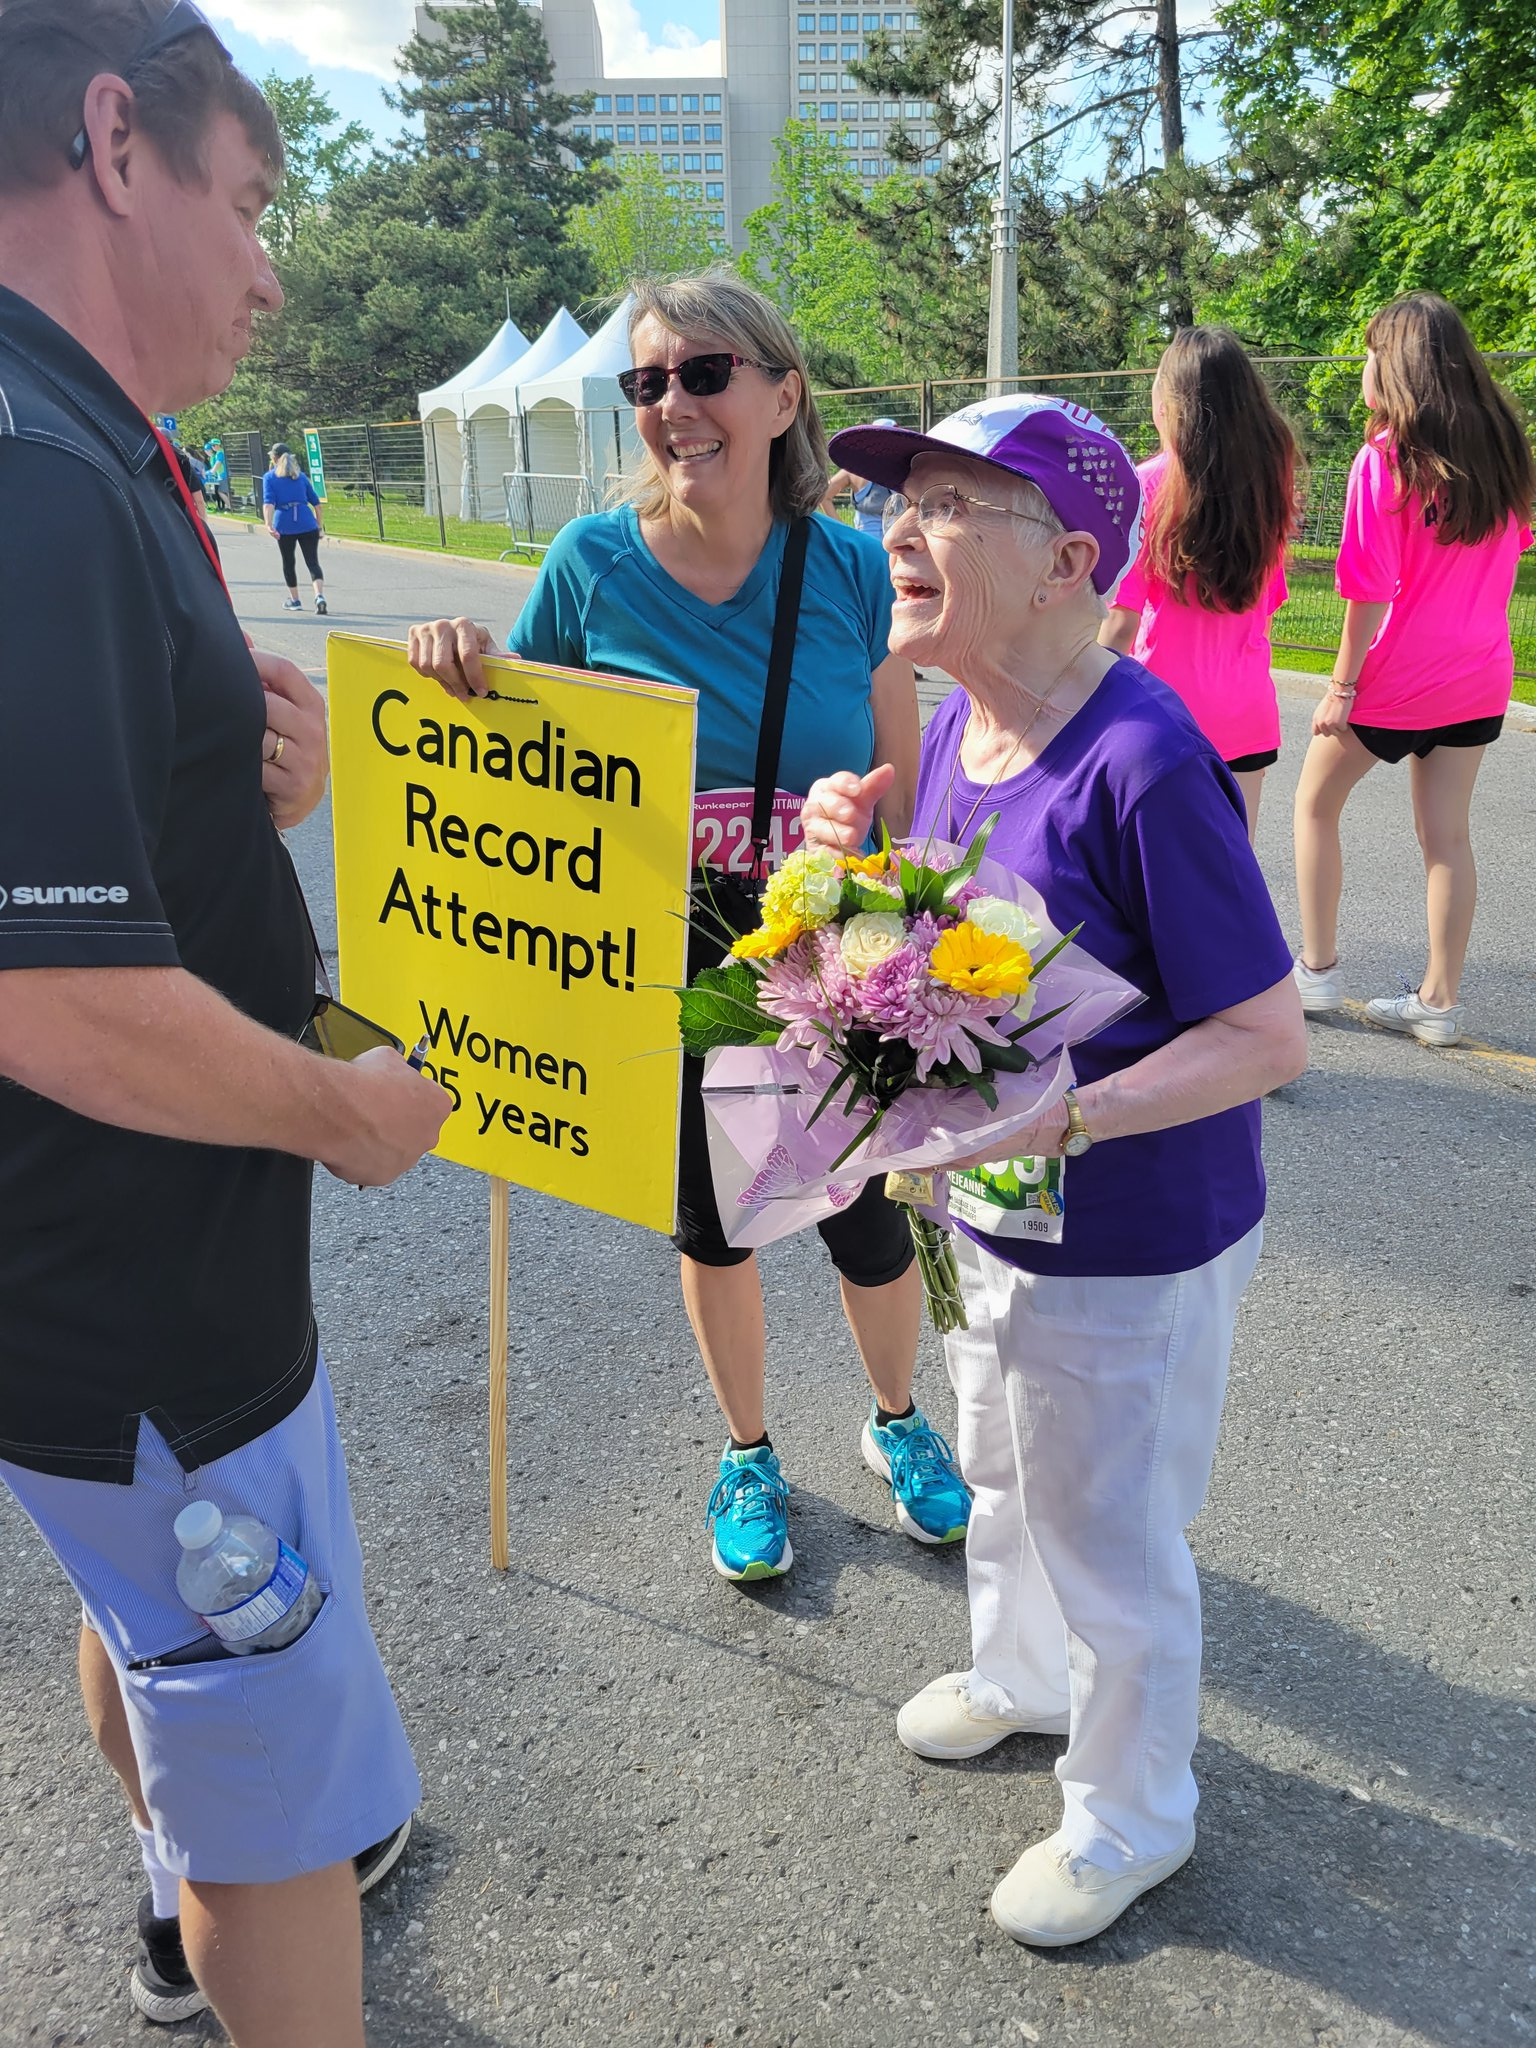 95 Year Old Ottawa Woman Broke A Record This Weekend!